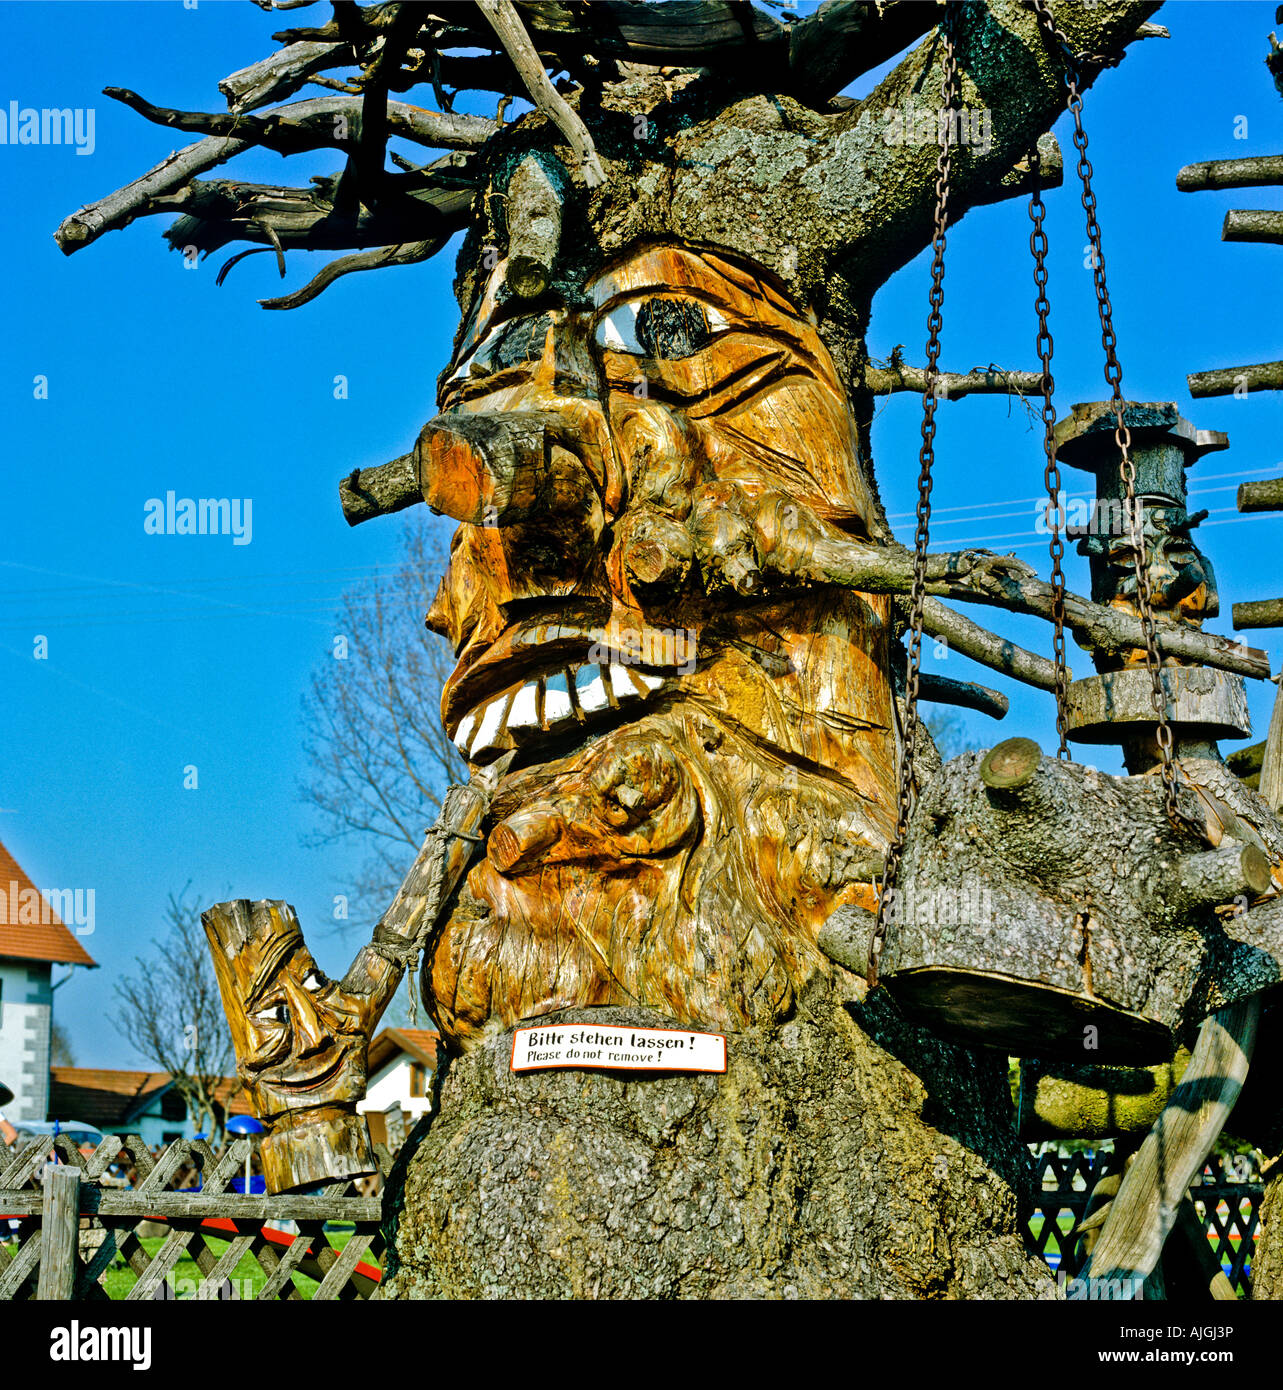 Grotesque face carved in a dead tree trunk in Bavaria Germany Europe EU Stock Photo